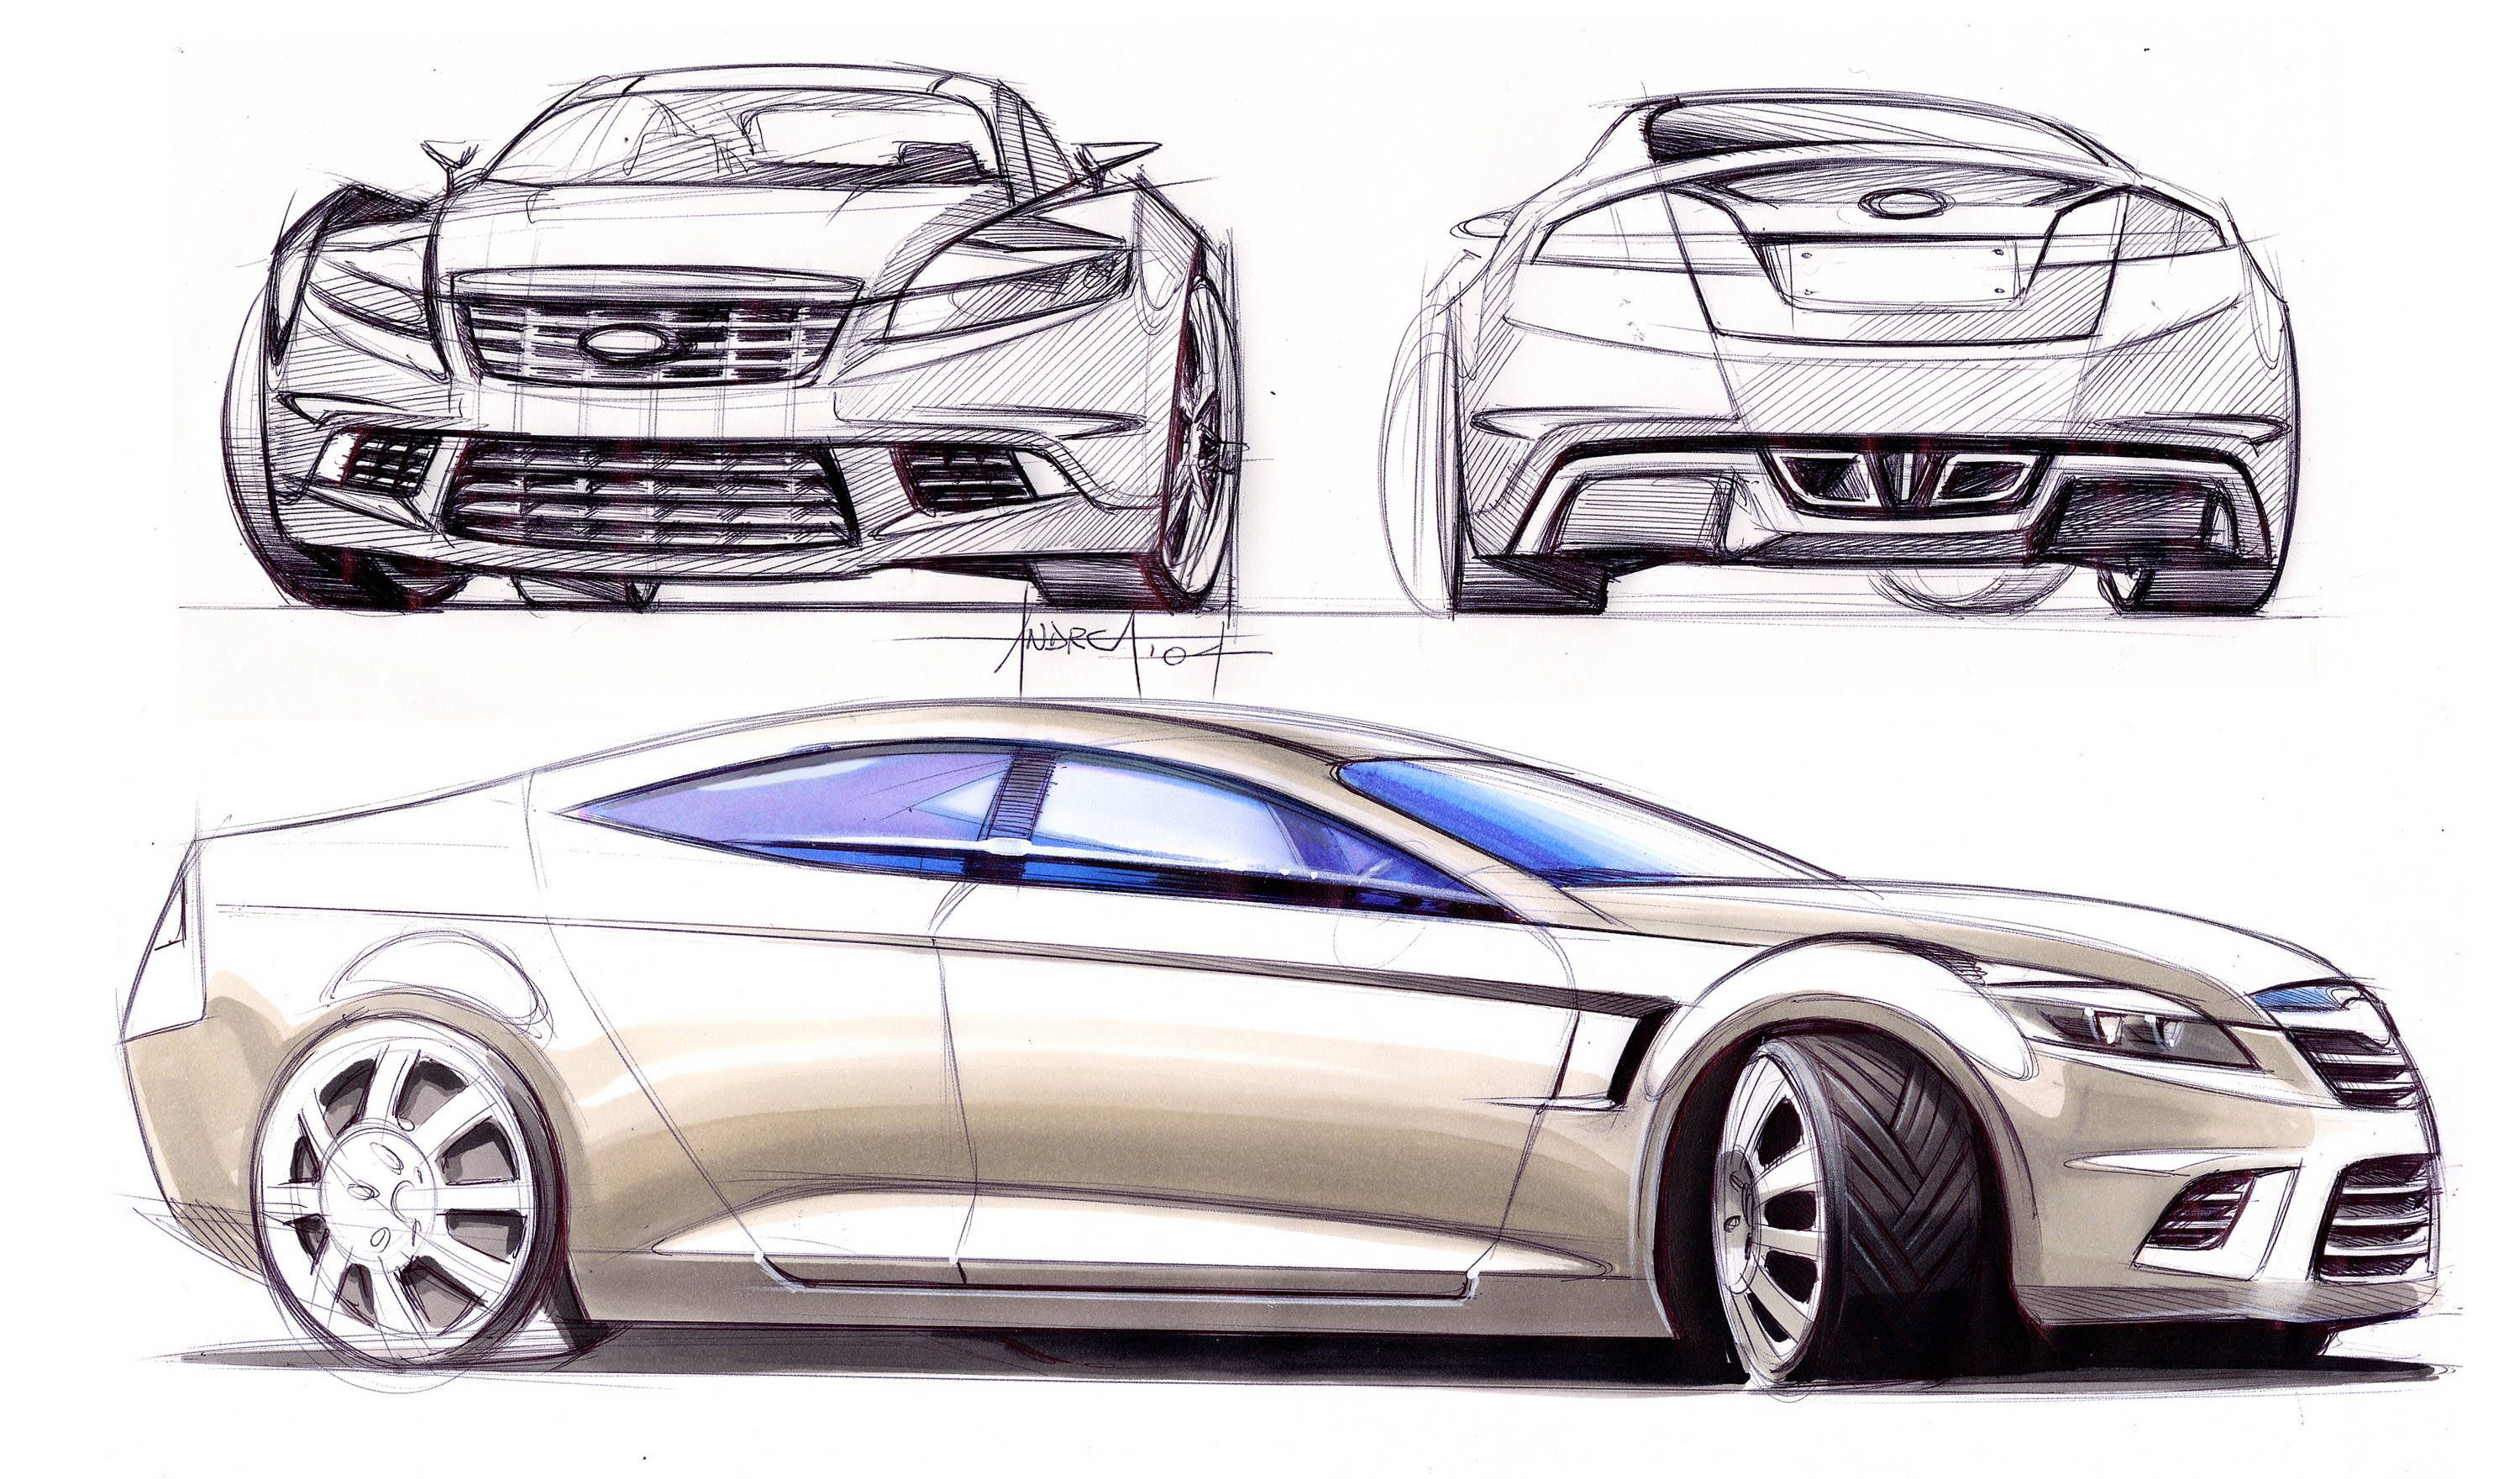  Ford official sketch